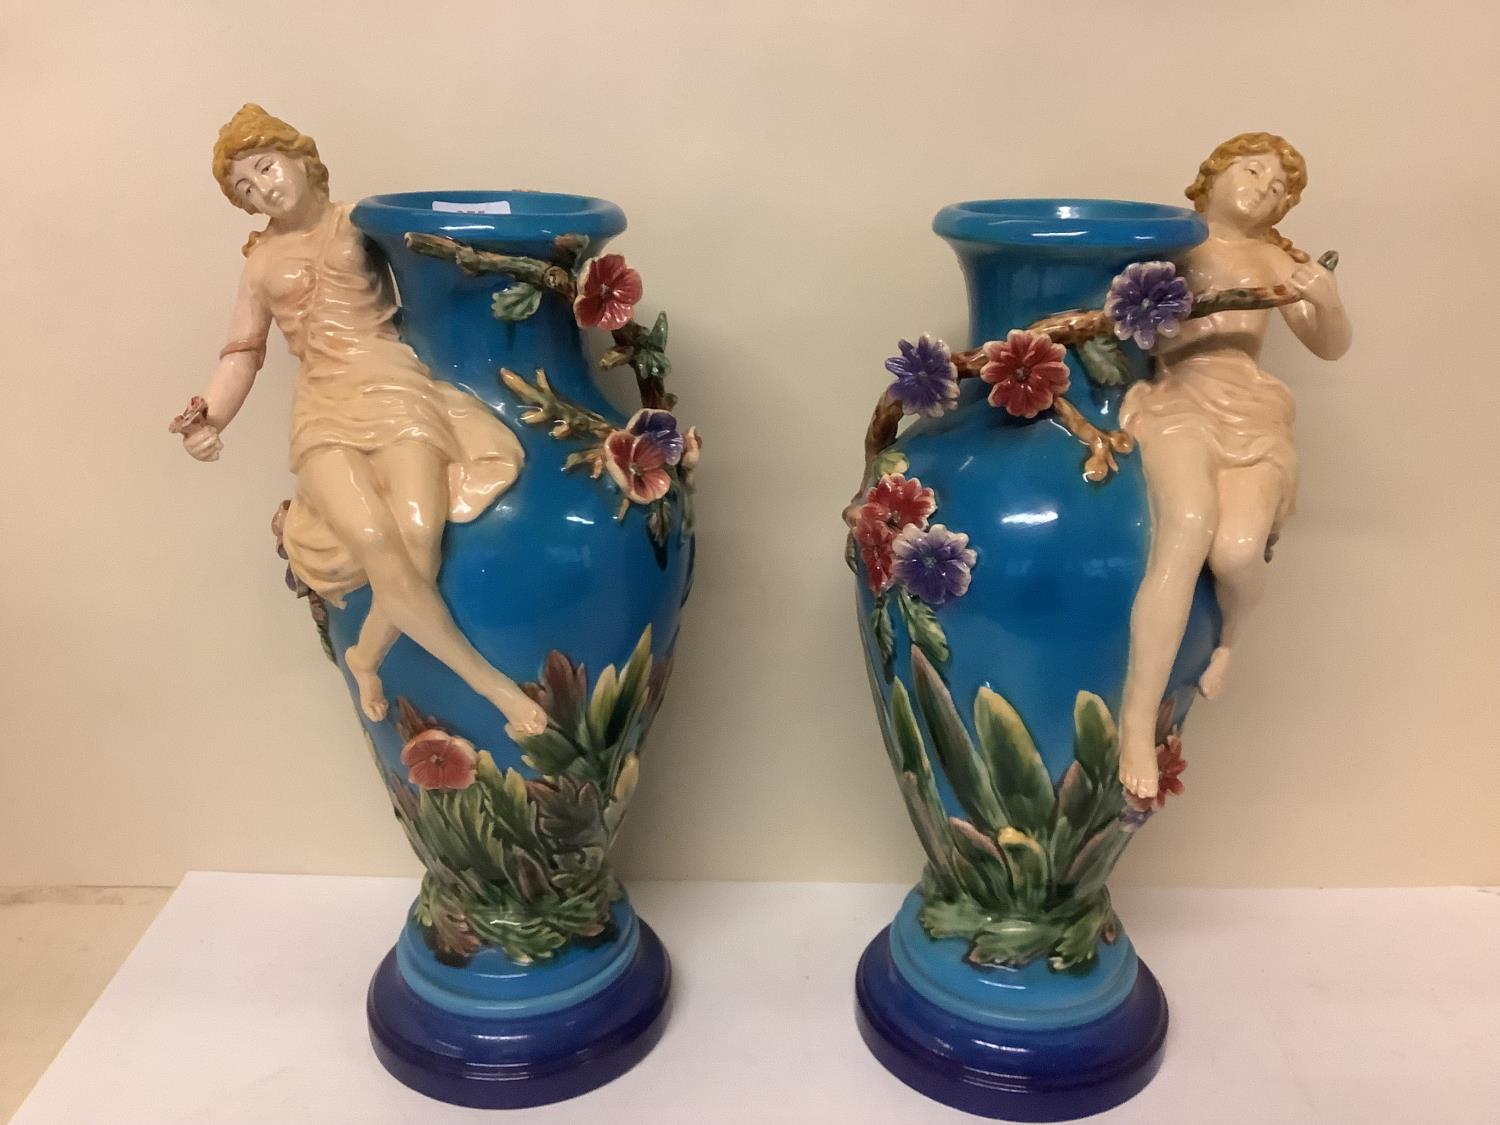 Pair of Continental majolica style vases, cast as maidens with branches of flowers on a sky blue